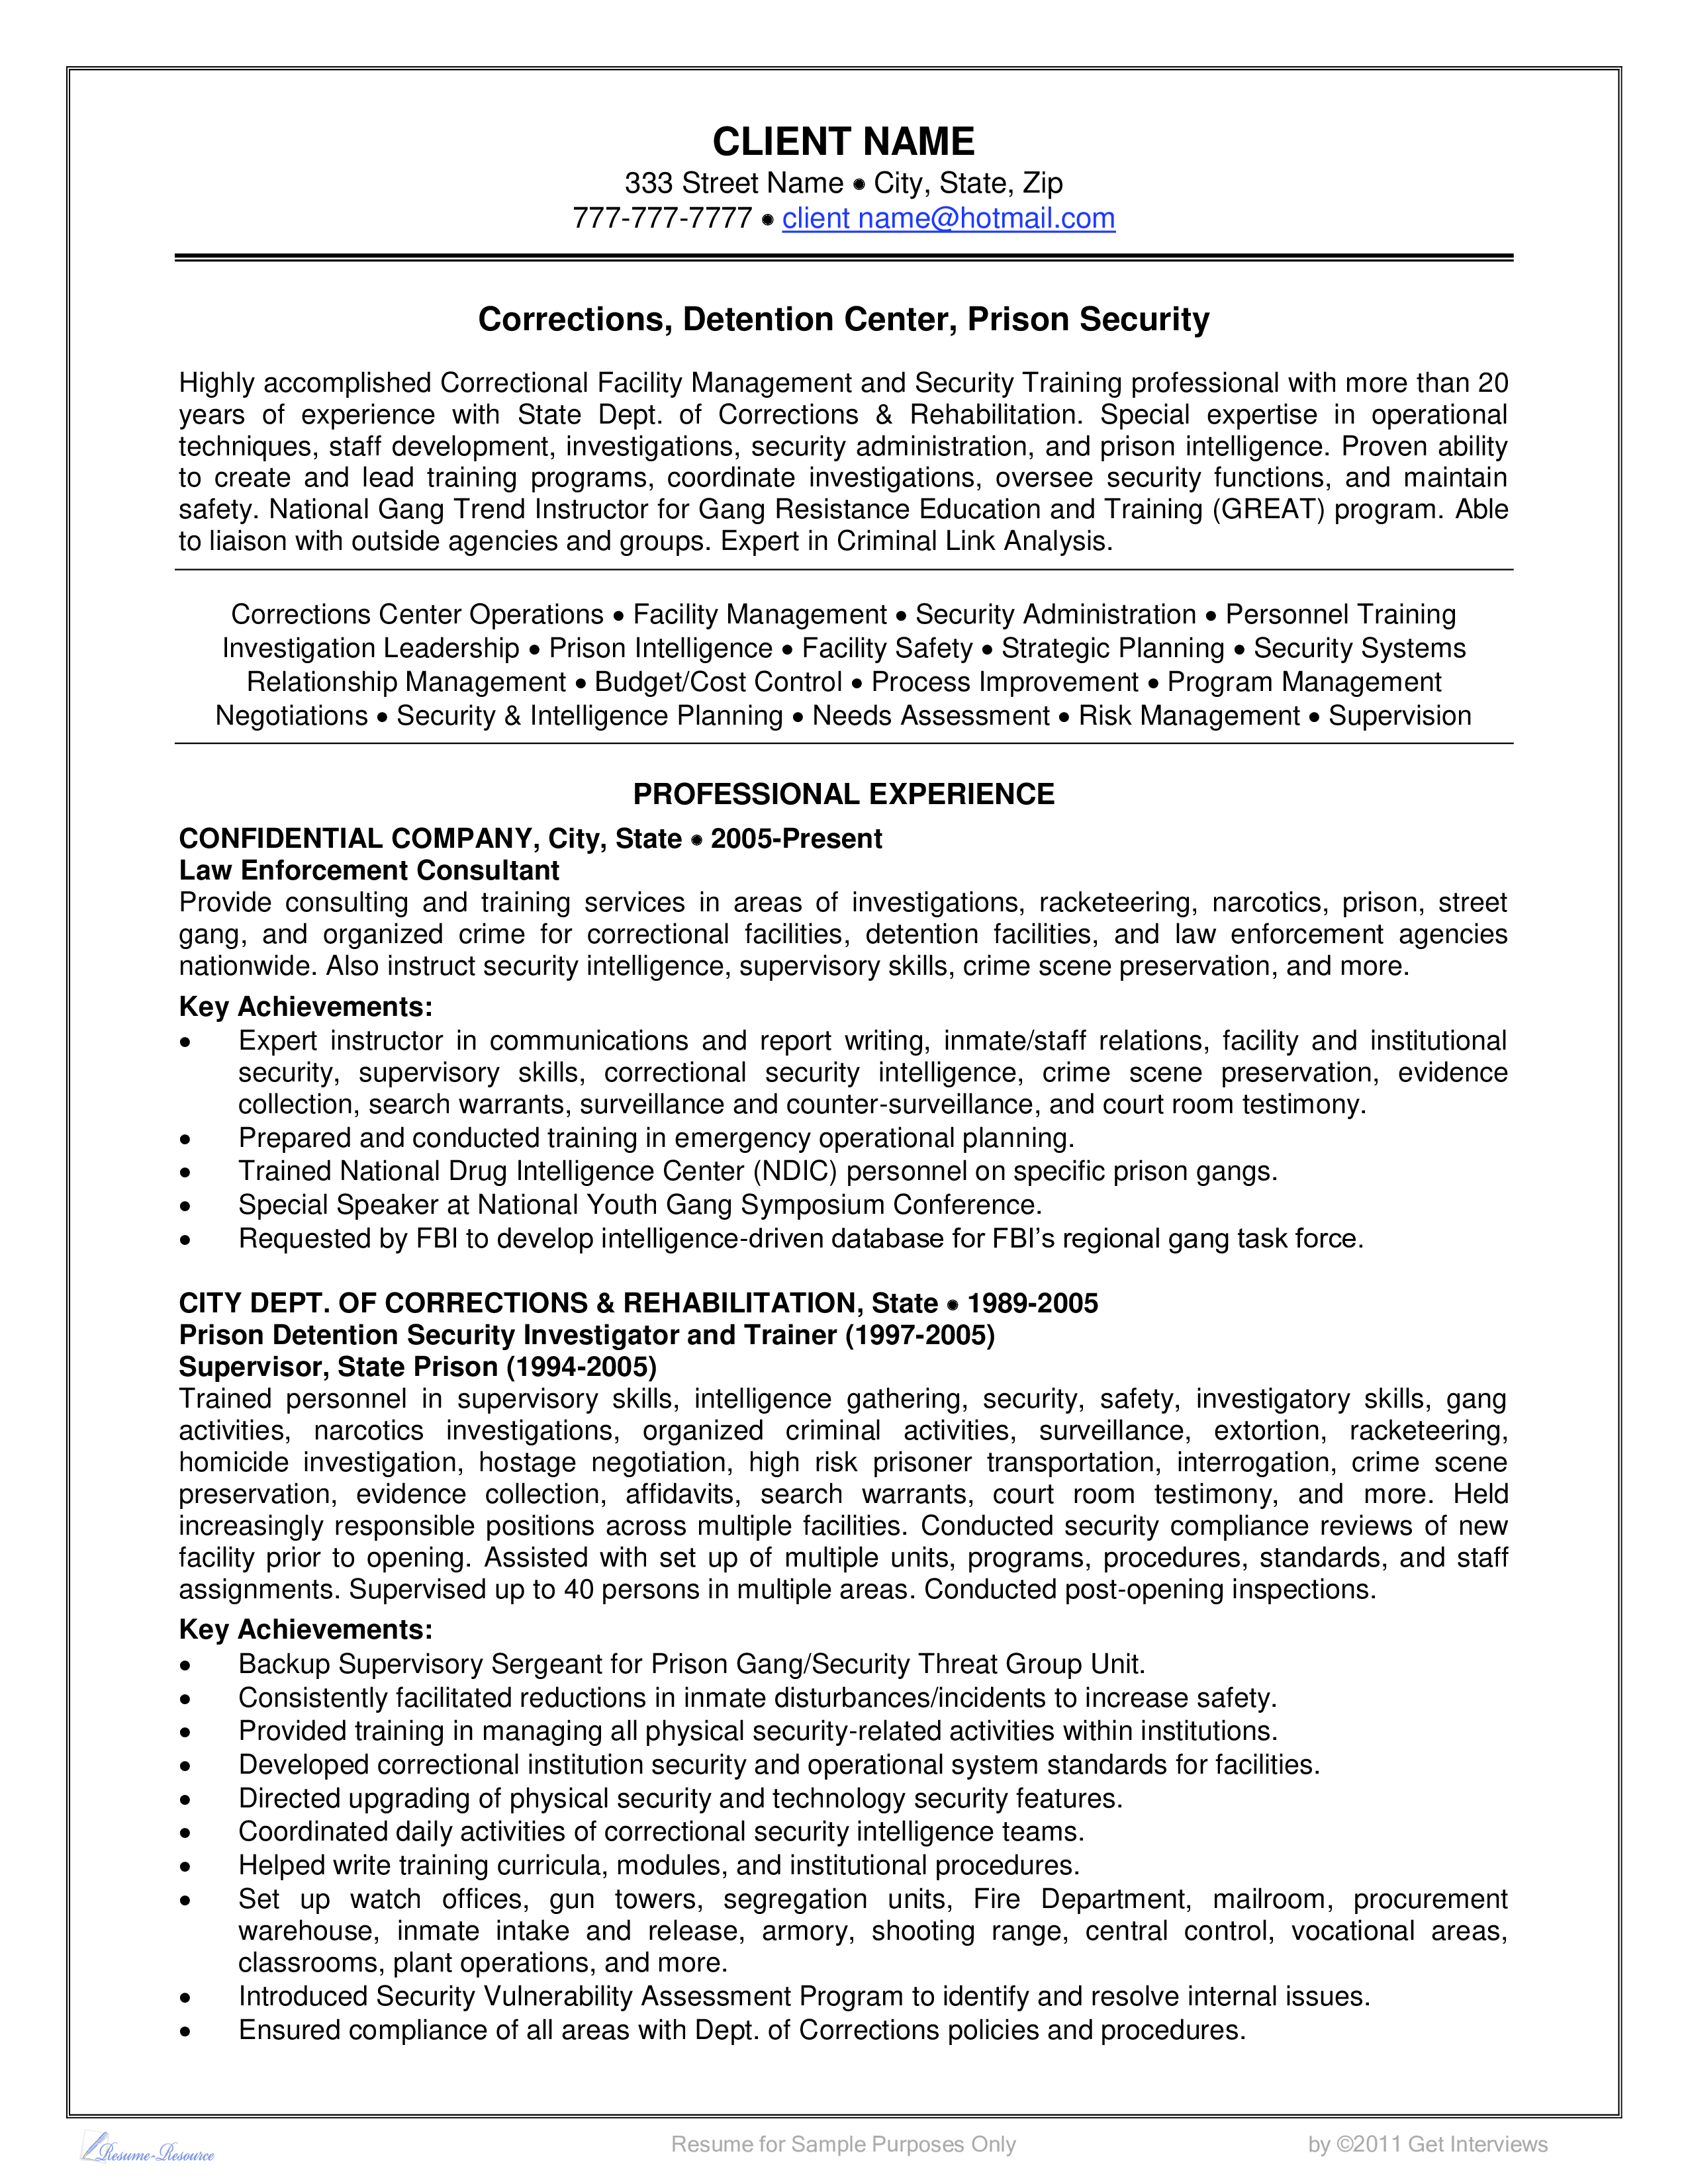 Security Officer Corrections Officer Resume Example 模板